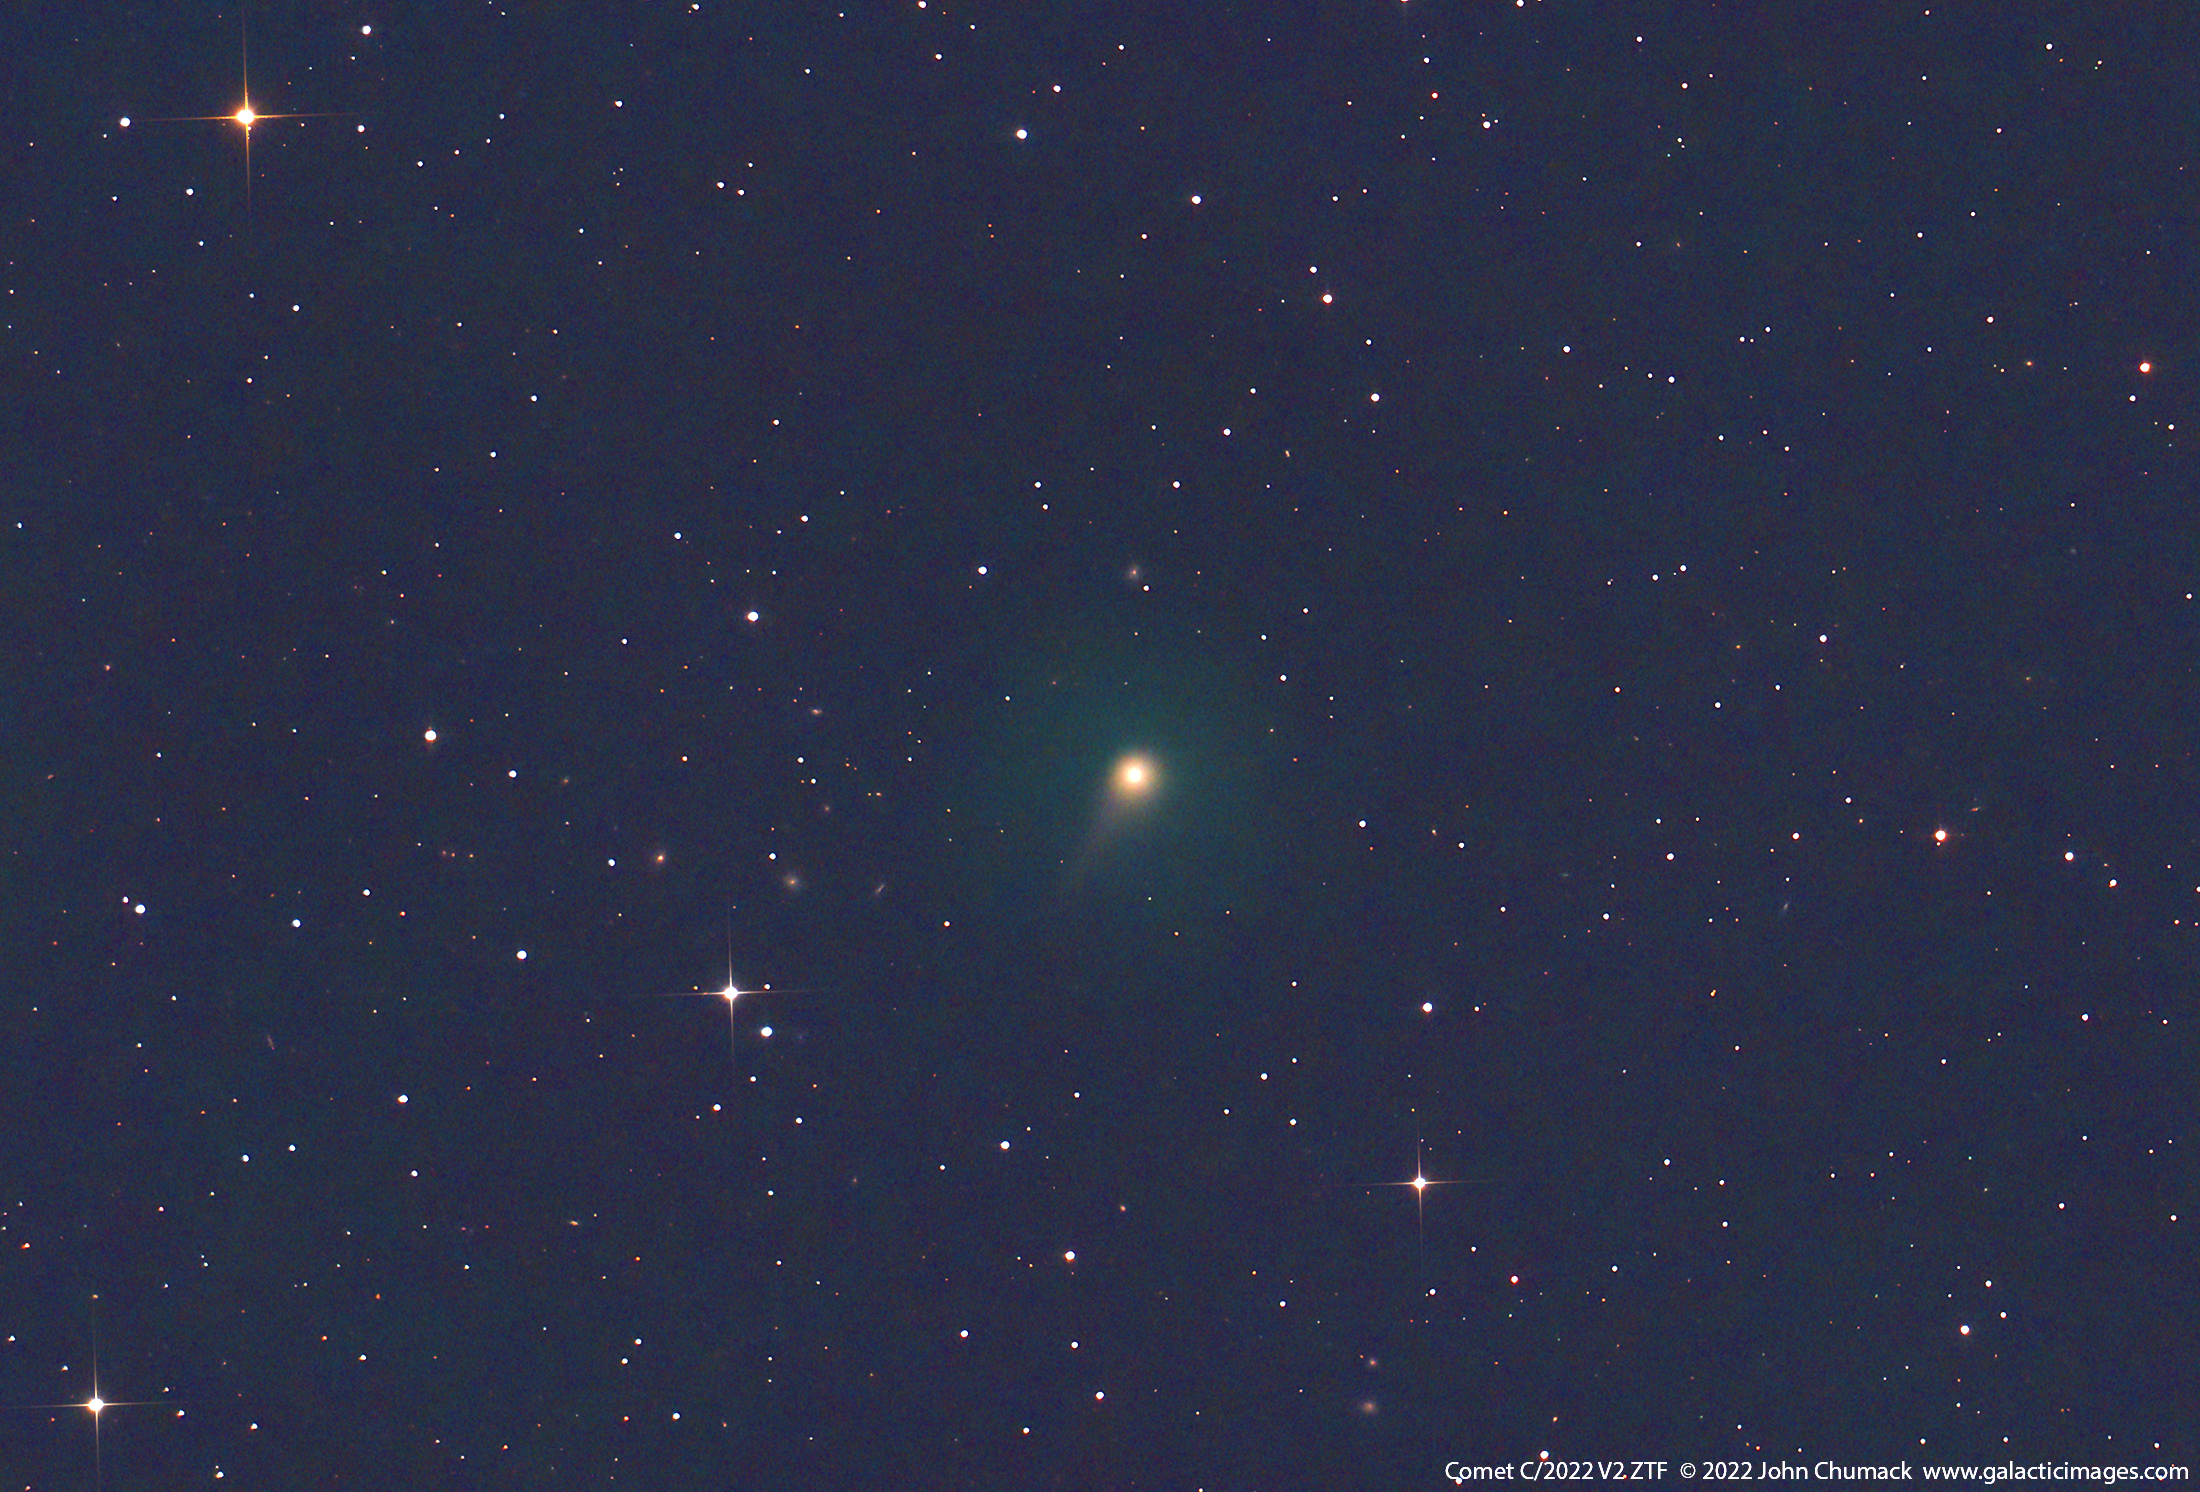 Comet C/2022 E3 ZTF photographed November 26, 2022 from Yellow Springs, Ohio.